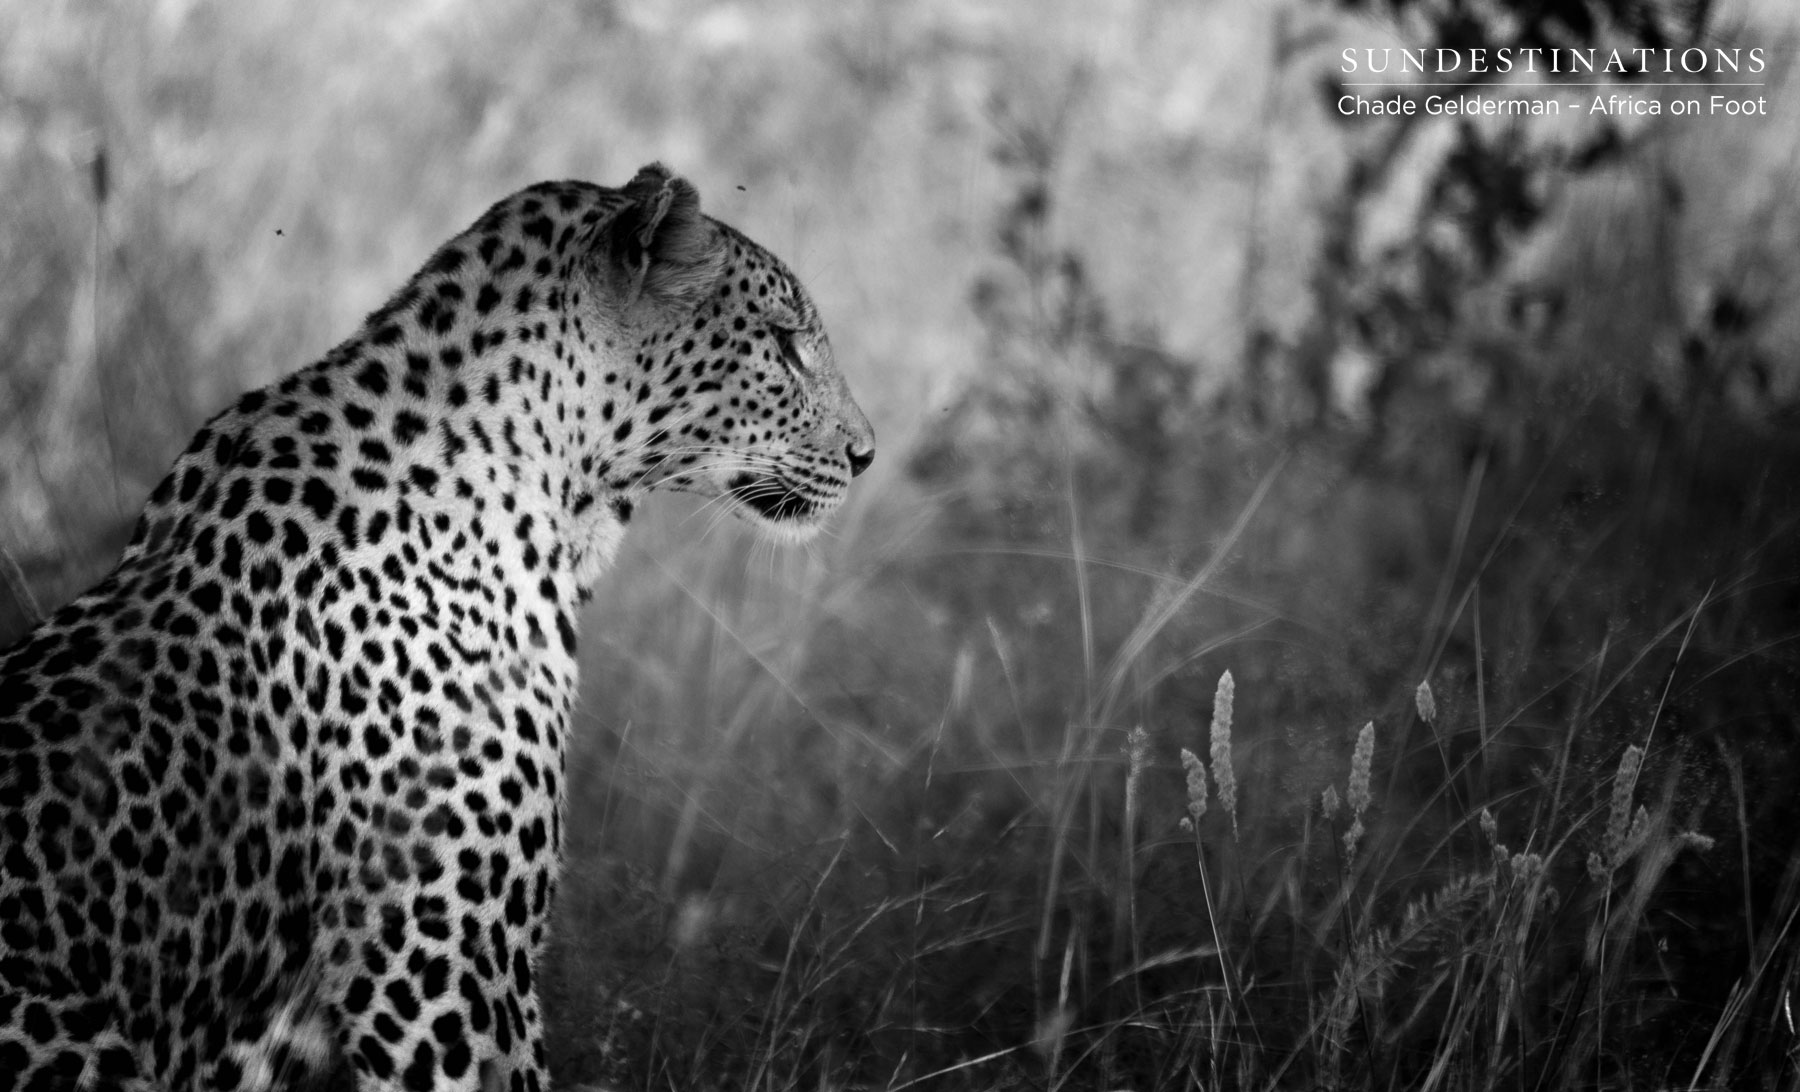 Leopard Sighting Africa on Foot